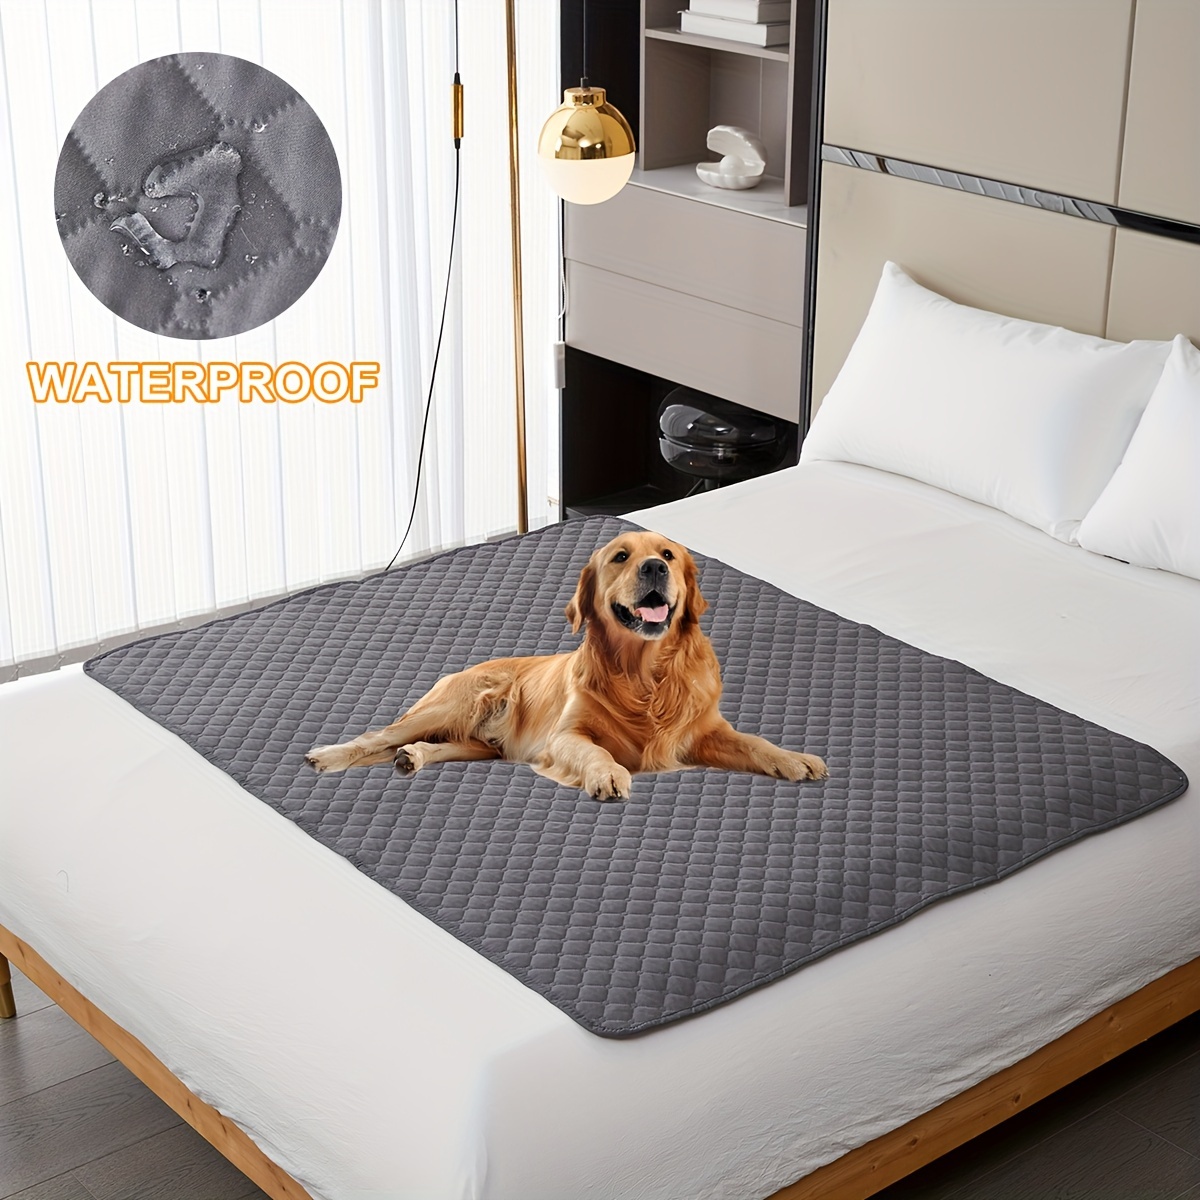 Waterproof Bedspread Washable Pets Dog Cat Kids Urine Pad Bed Sheet Covers  Quilted Mattress Pads Non-Slip Mattress Covers Home - AliExpress